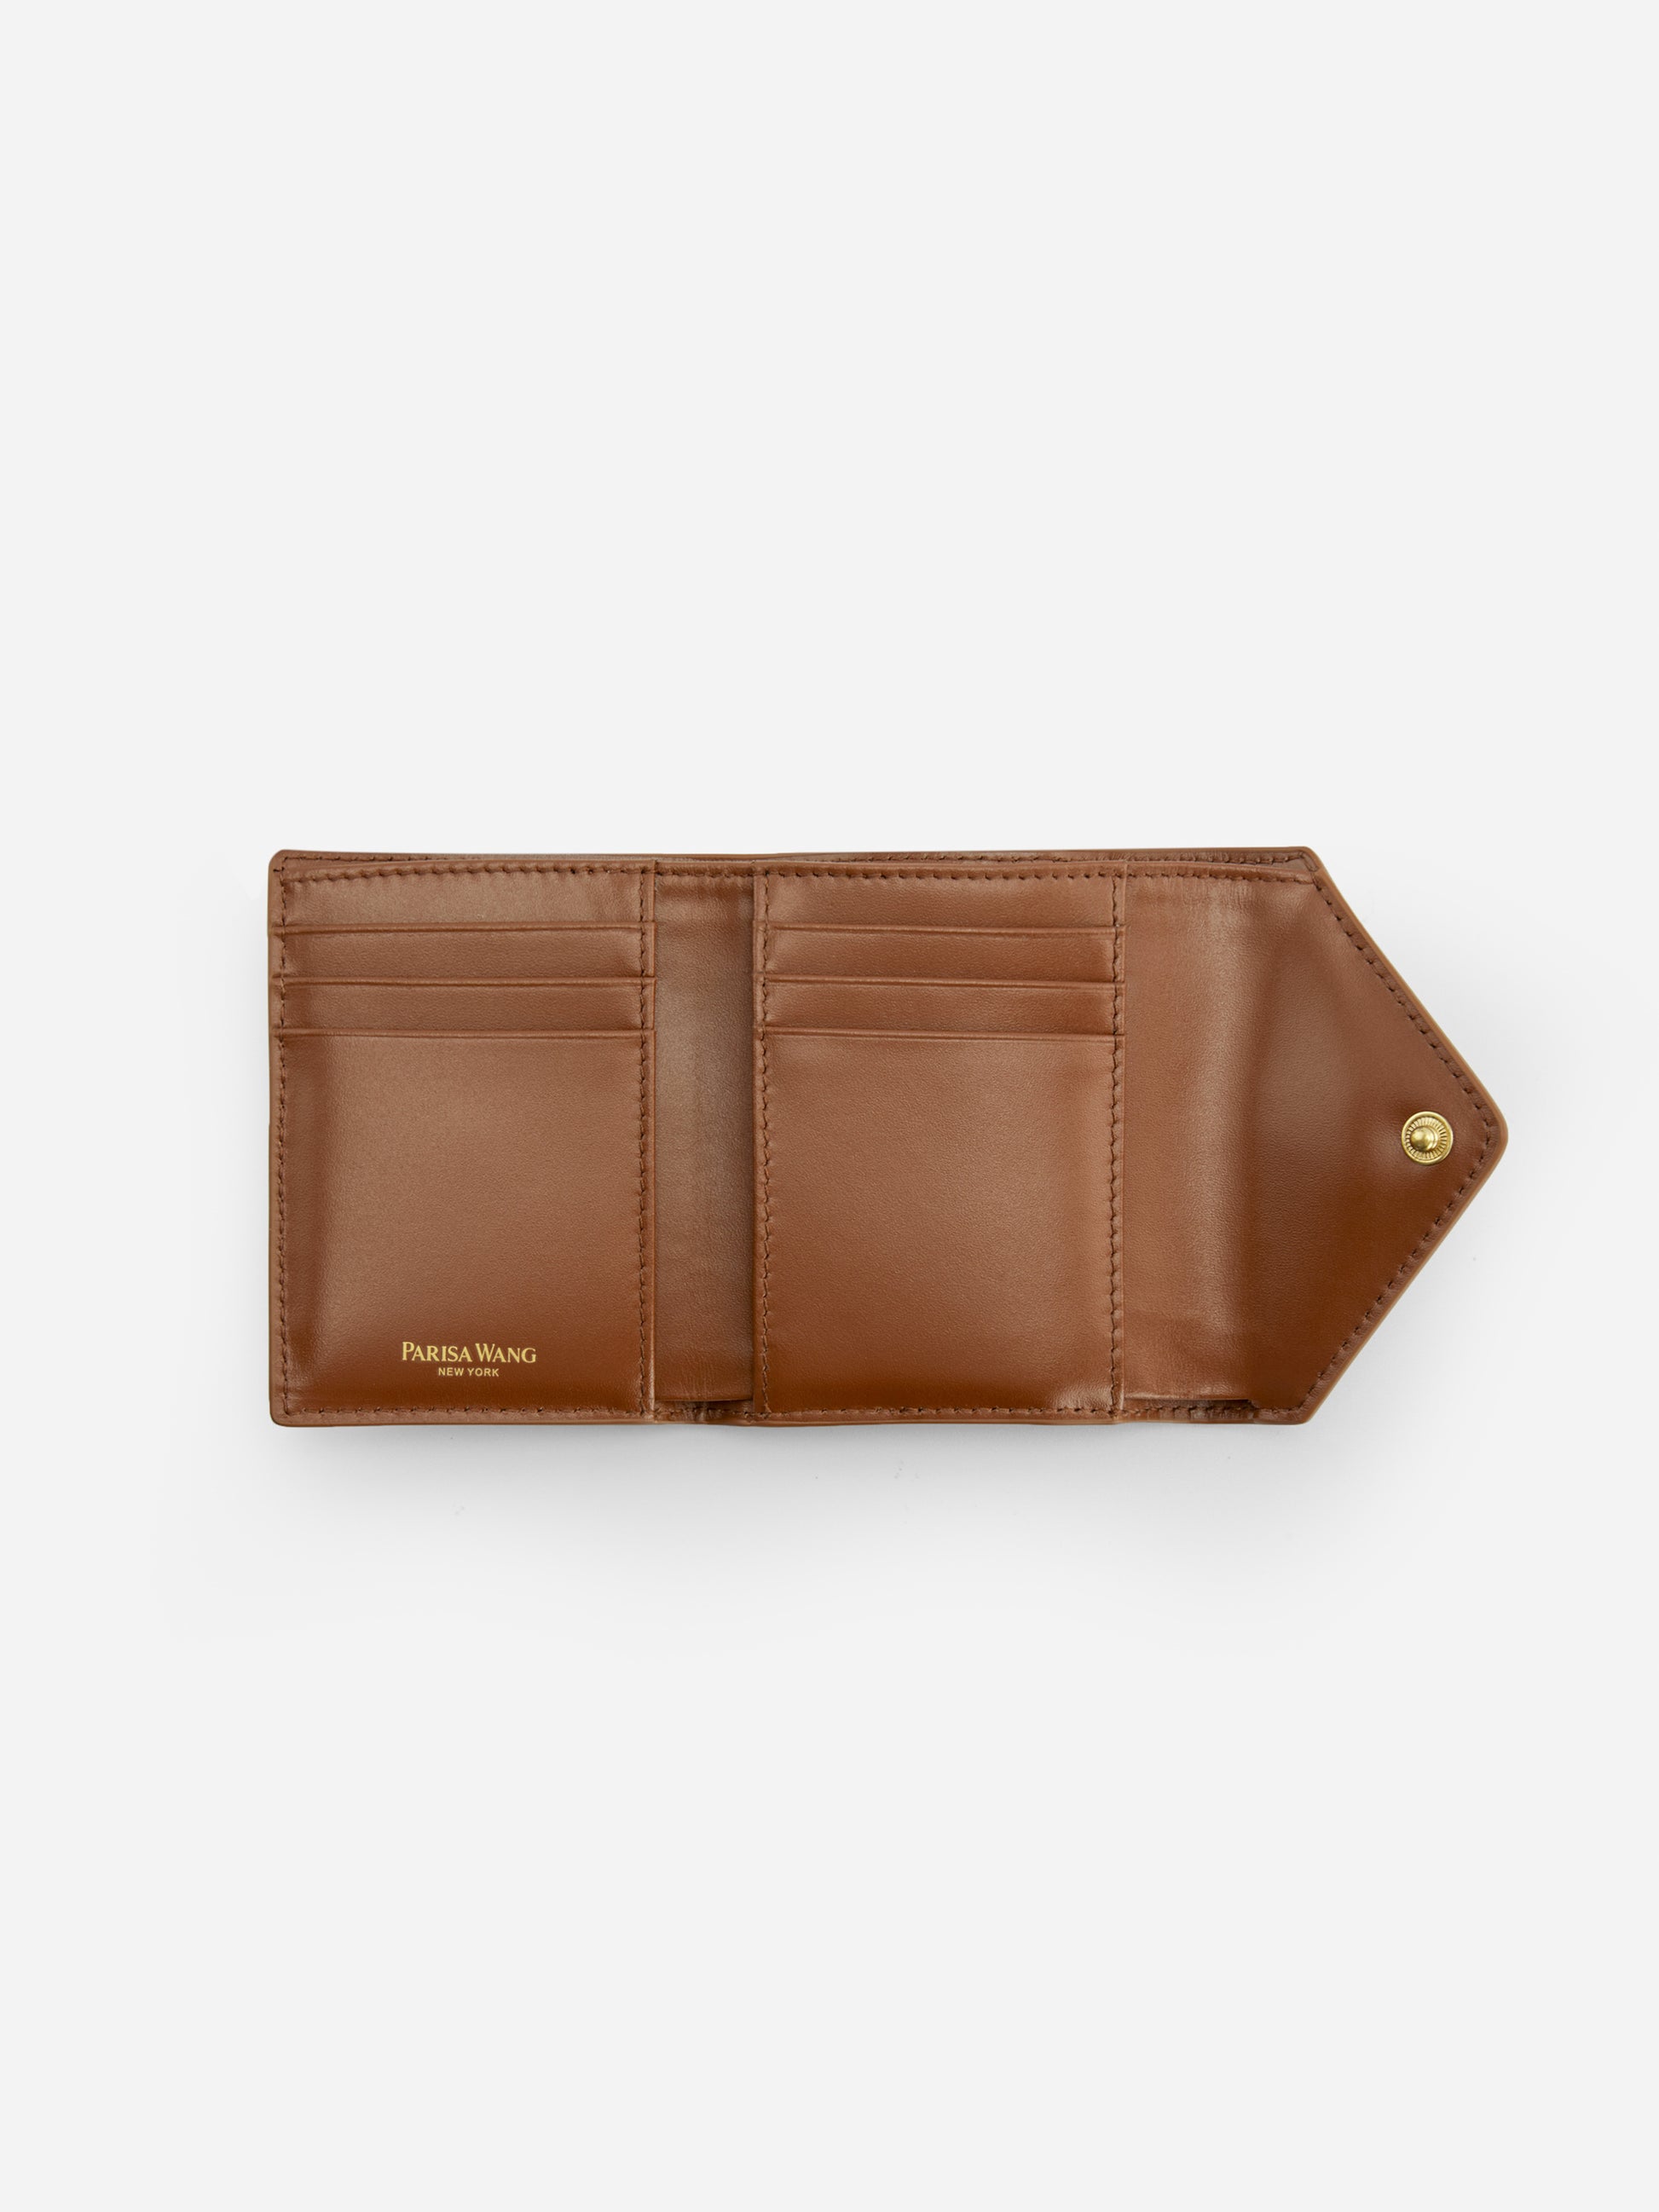 PW Small Envelope Wallet in Brown | Parisa Wang | Featured